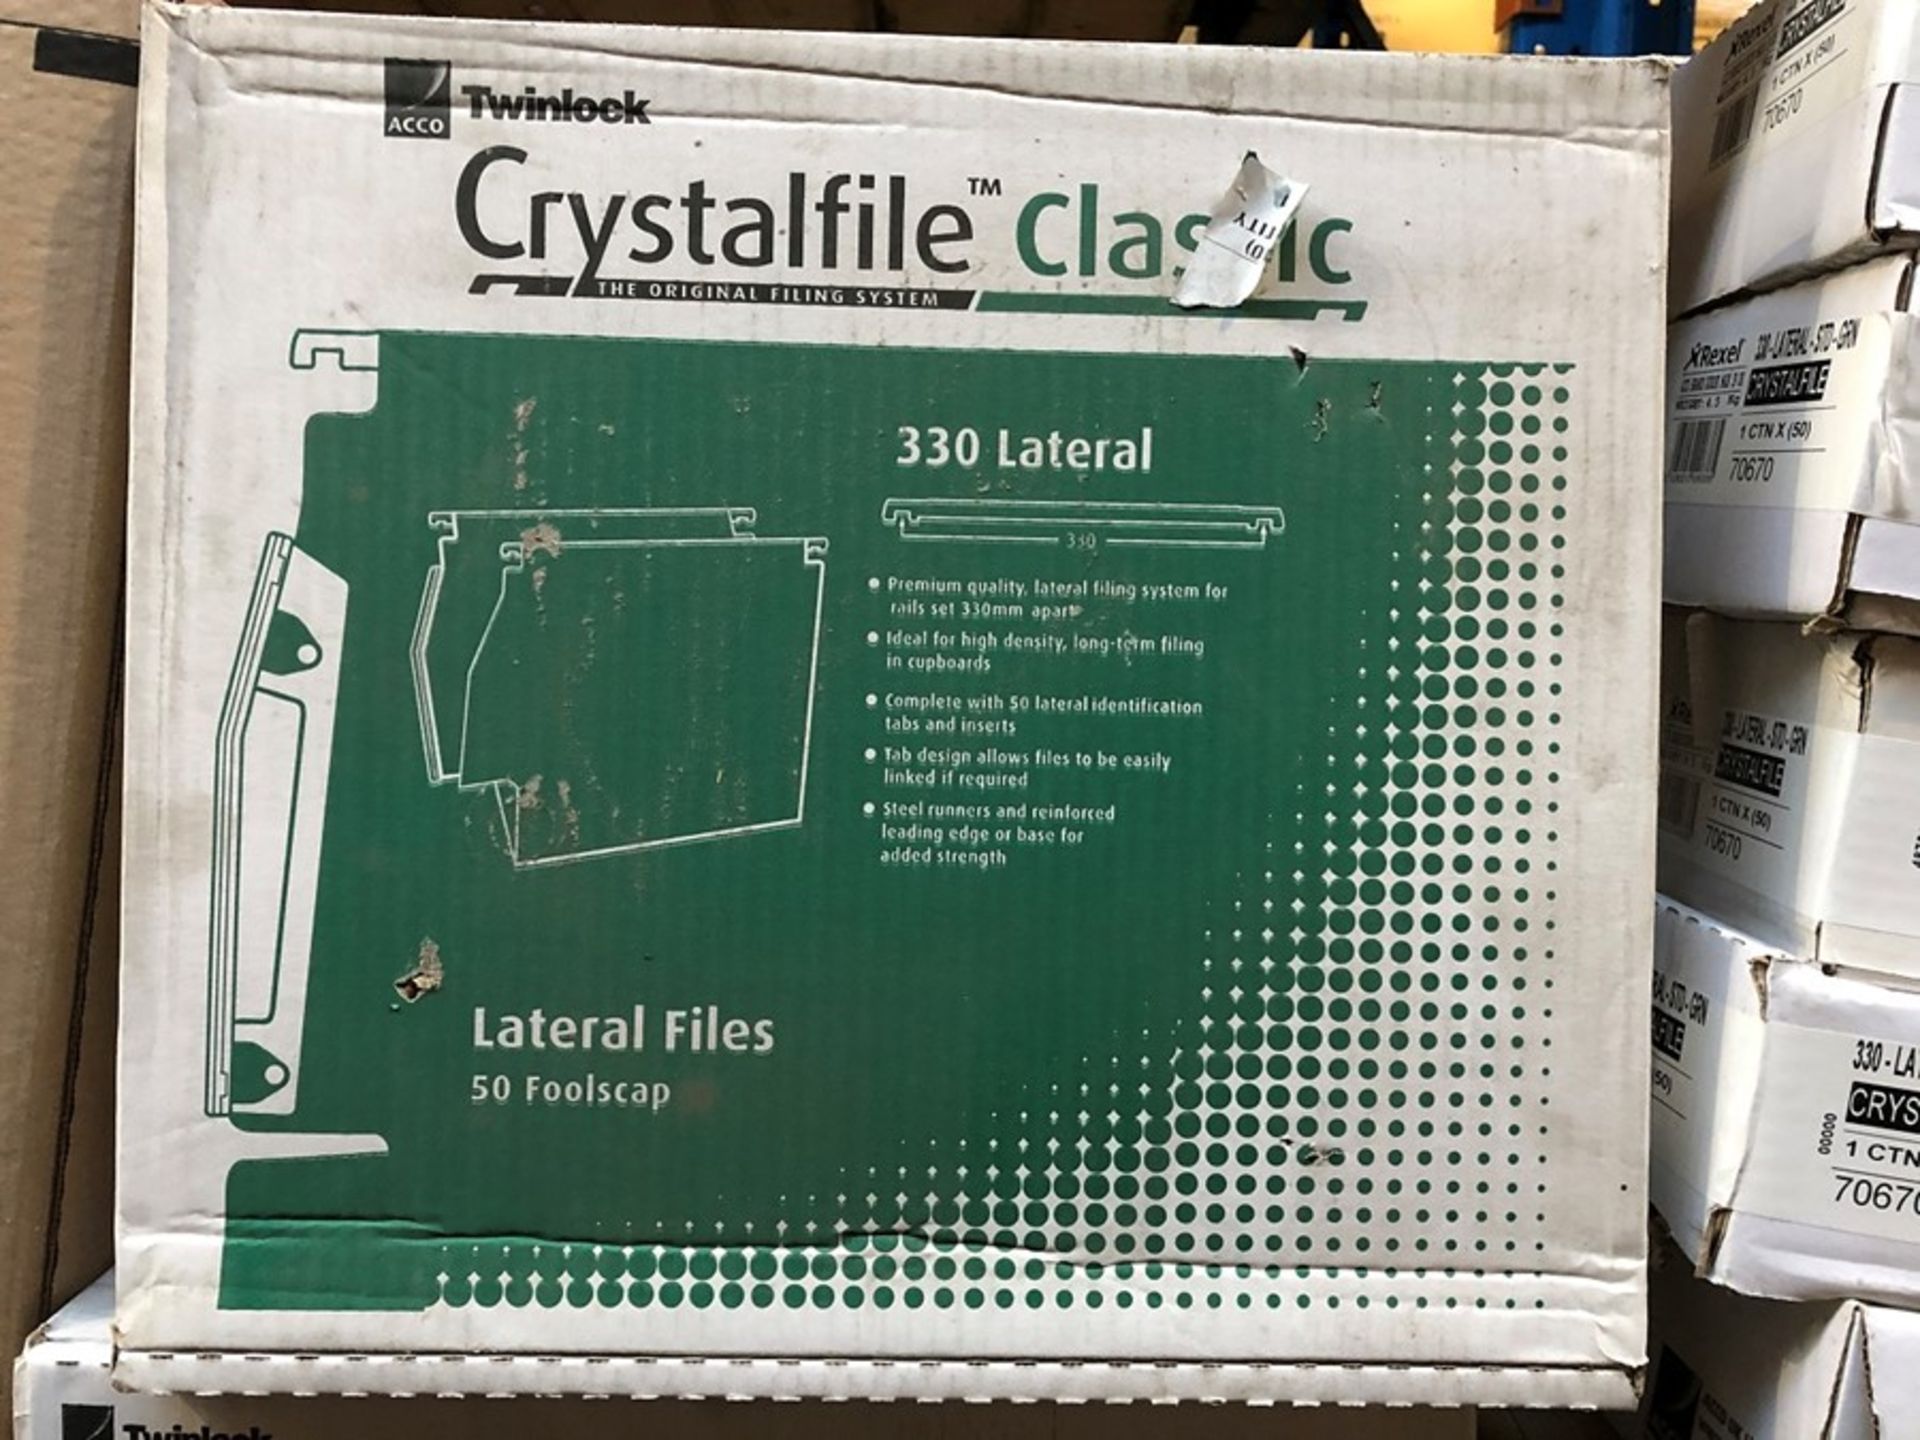 1 BOXED SET TO CONTAIN 50 CRYSTALIFE CLASSIC 330 LATERAL FILES - GREEN (PUBLIC VIEWING AVAILABLE)